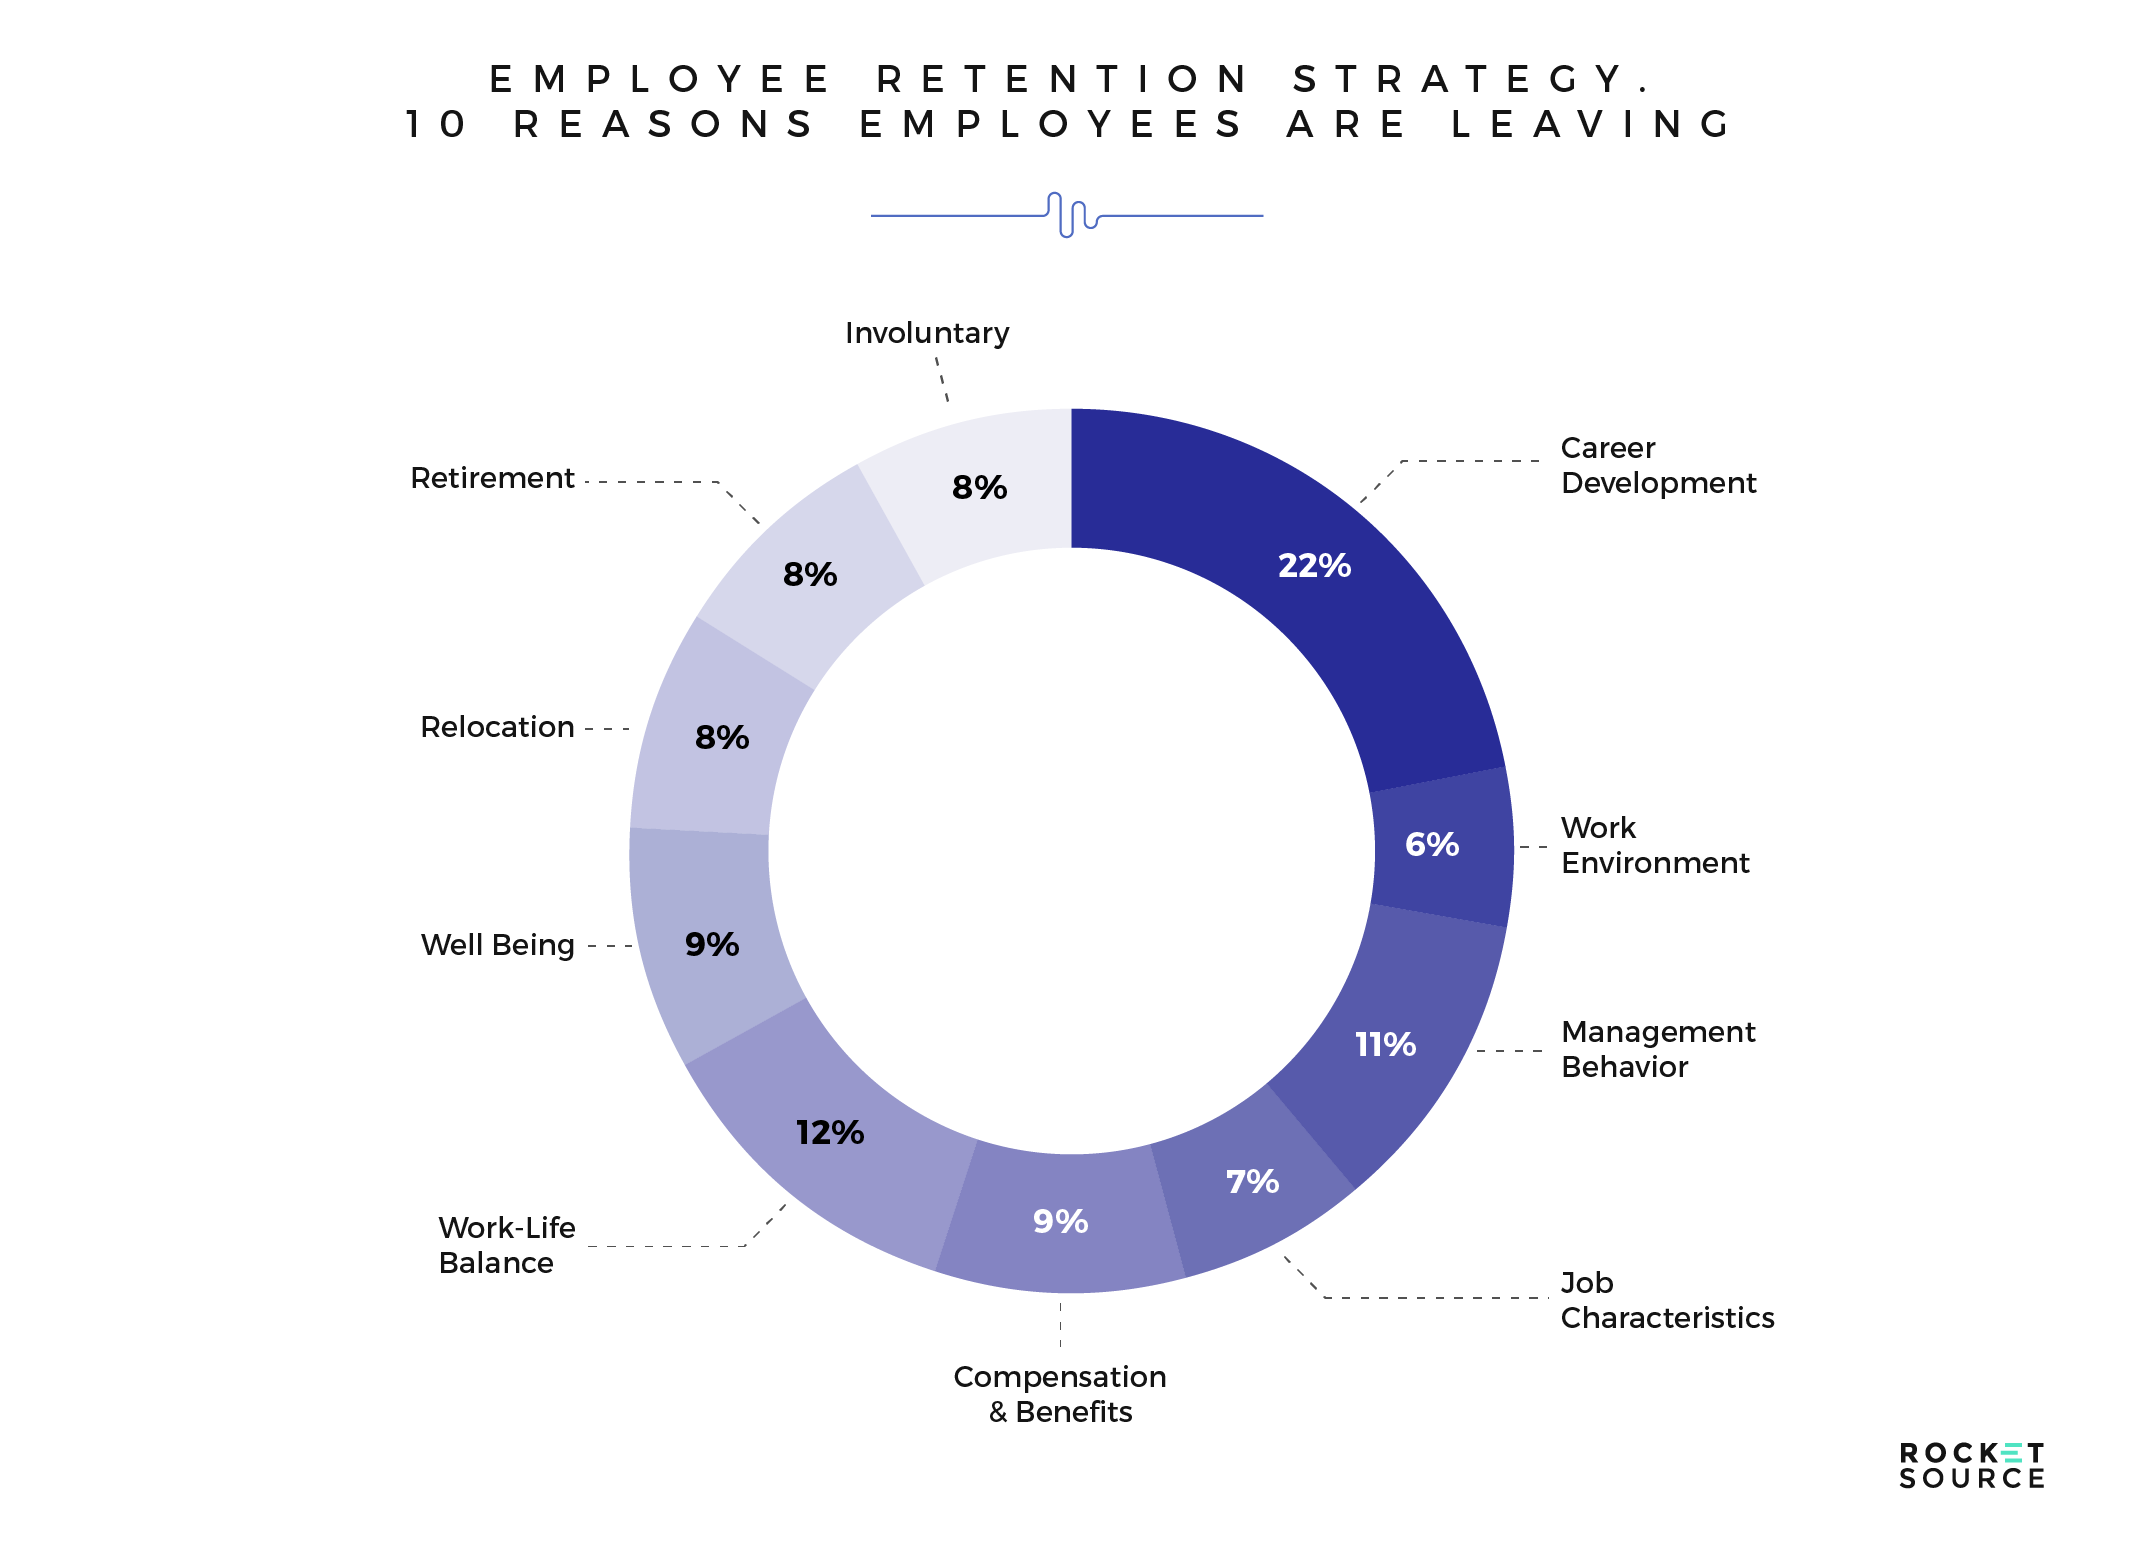 product led growth strategy and employee retention